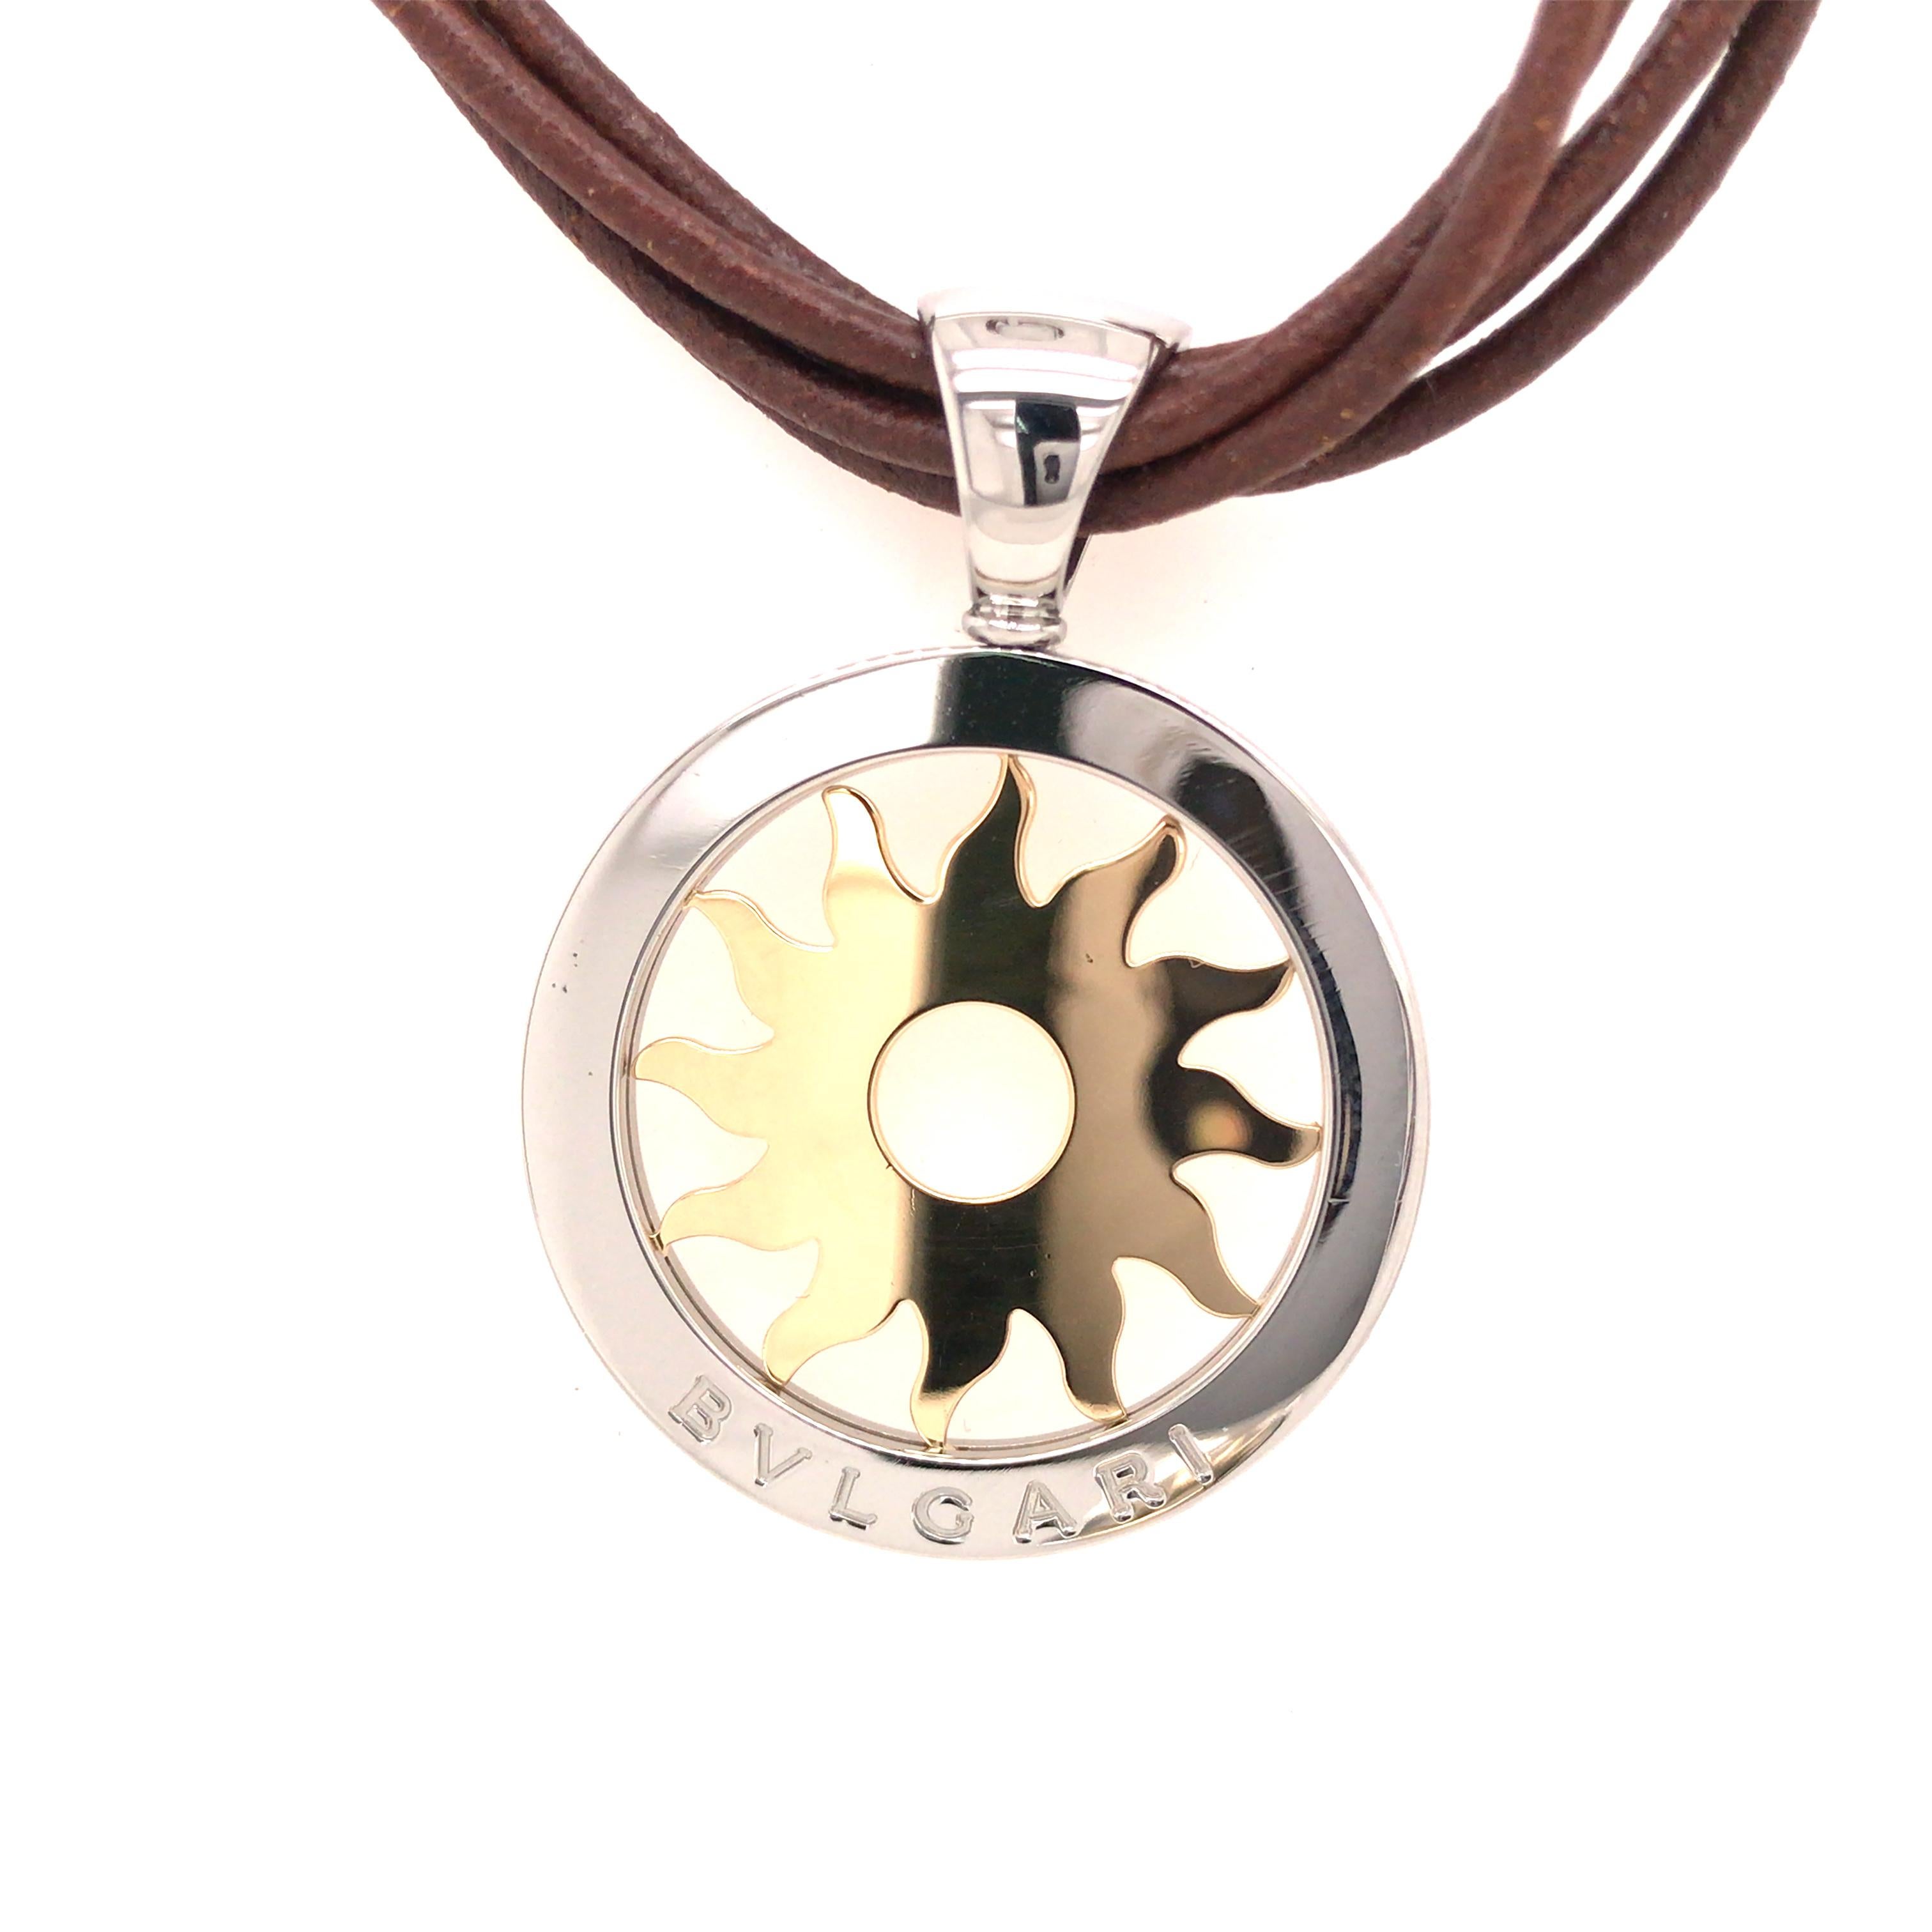 Bvlgari Tondo 18K Yellow Gold and Steel Sun Pendant Leather Cord Necklace.  The Necklace measures 15 inch in length. 23.9 grams.  Inscribed 